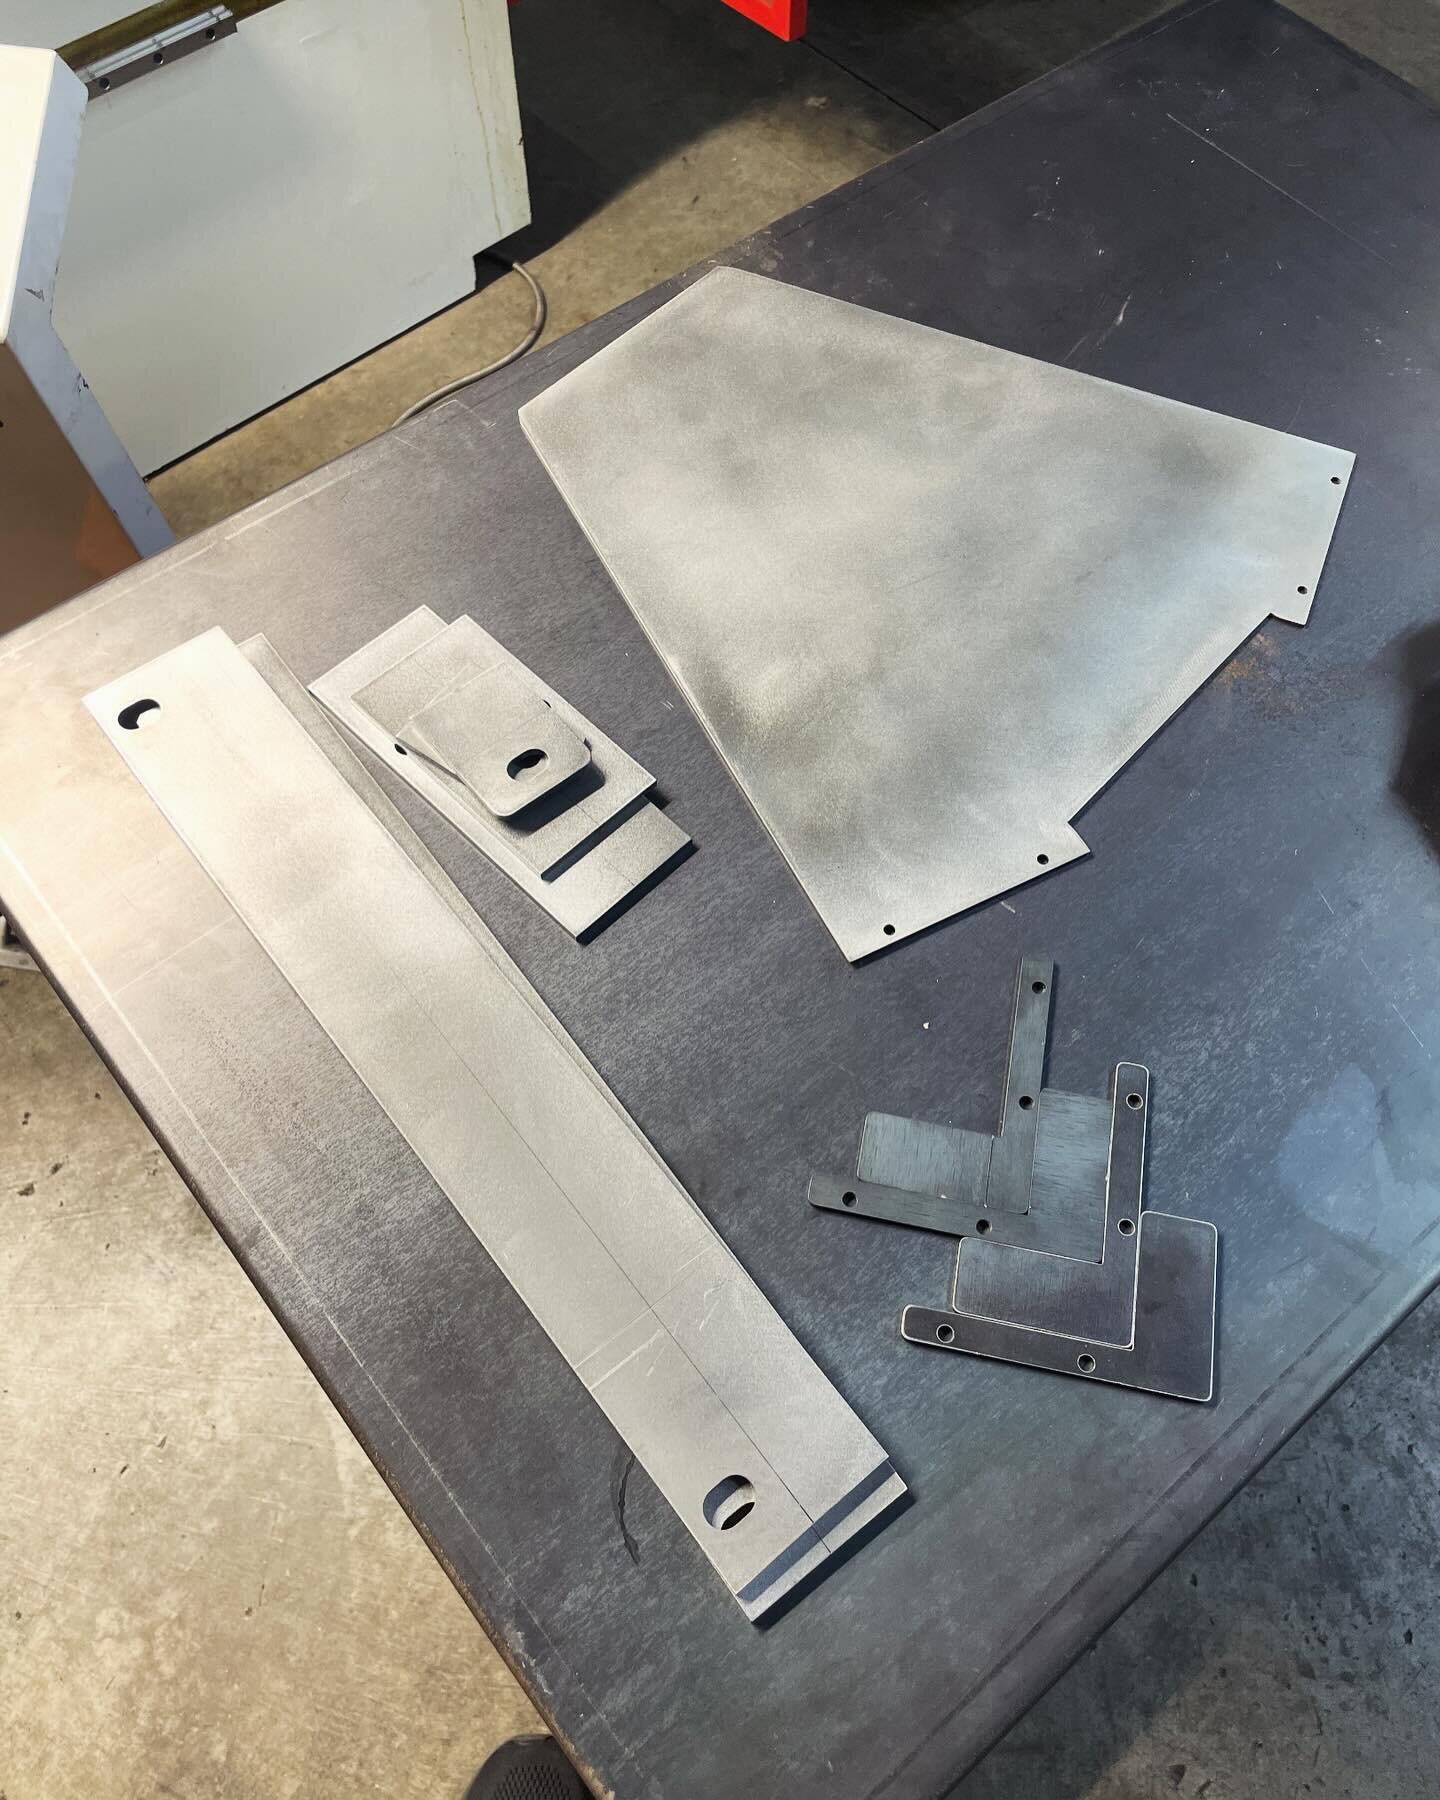 Cutting and bending a little bit of just about everything in February!  What projects do you need laser cut?!

#fabrication #metallasercutter #lasercutting #pressbrake @bodor_laser_ #manufacturing #steel #engineering